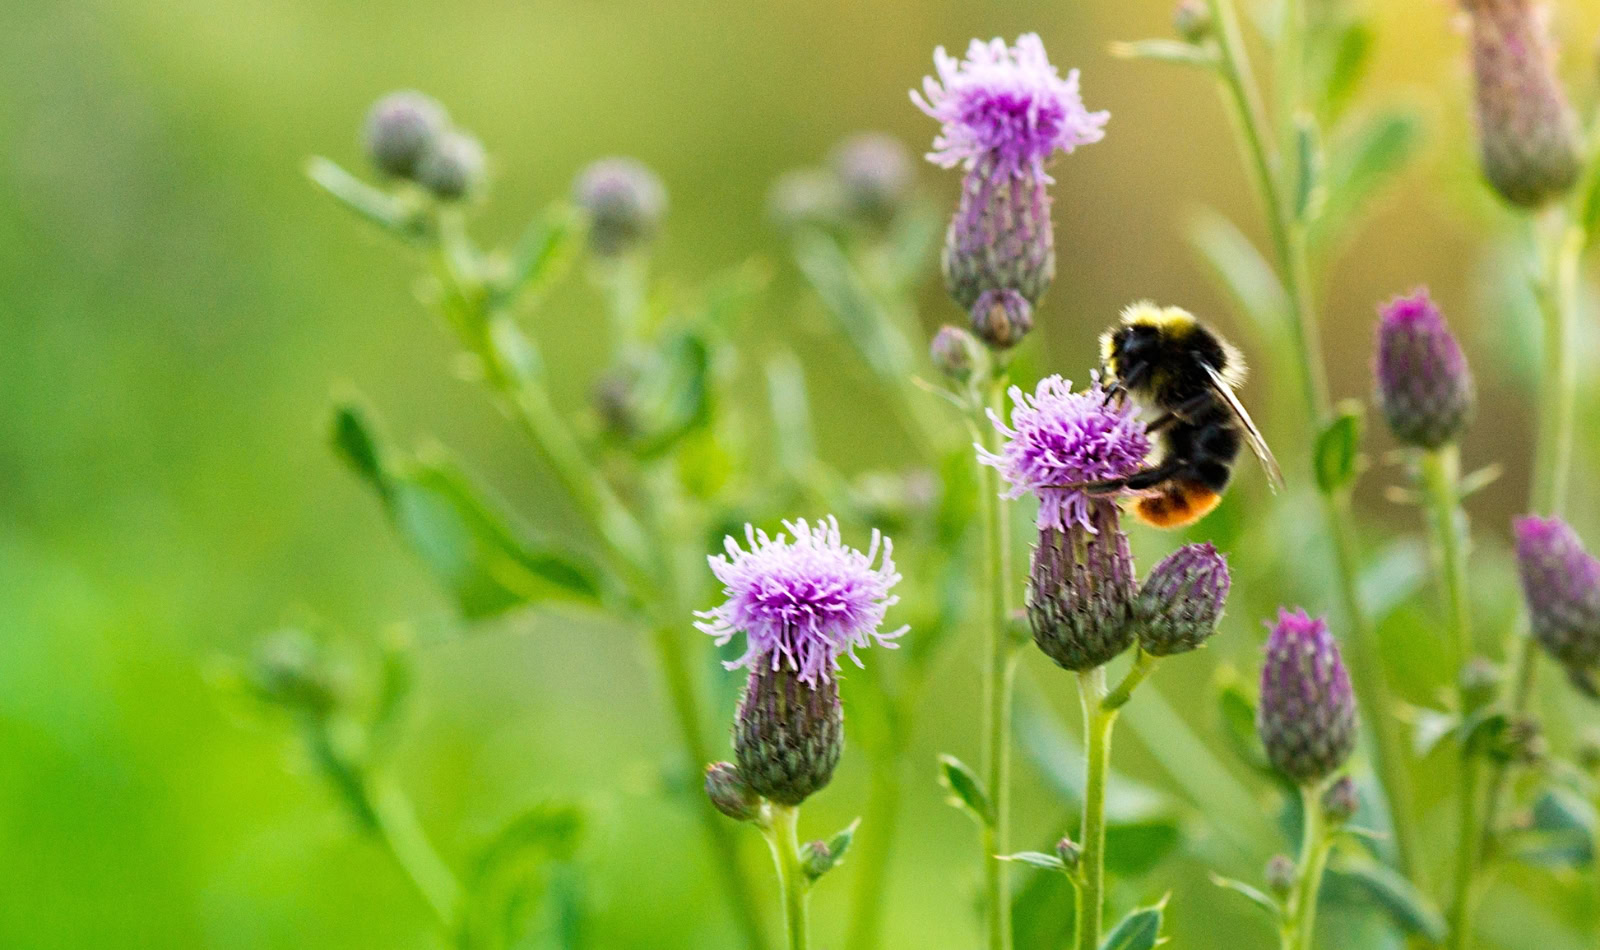 thistles with a bumblebee